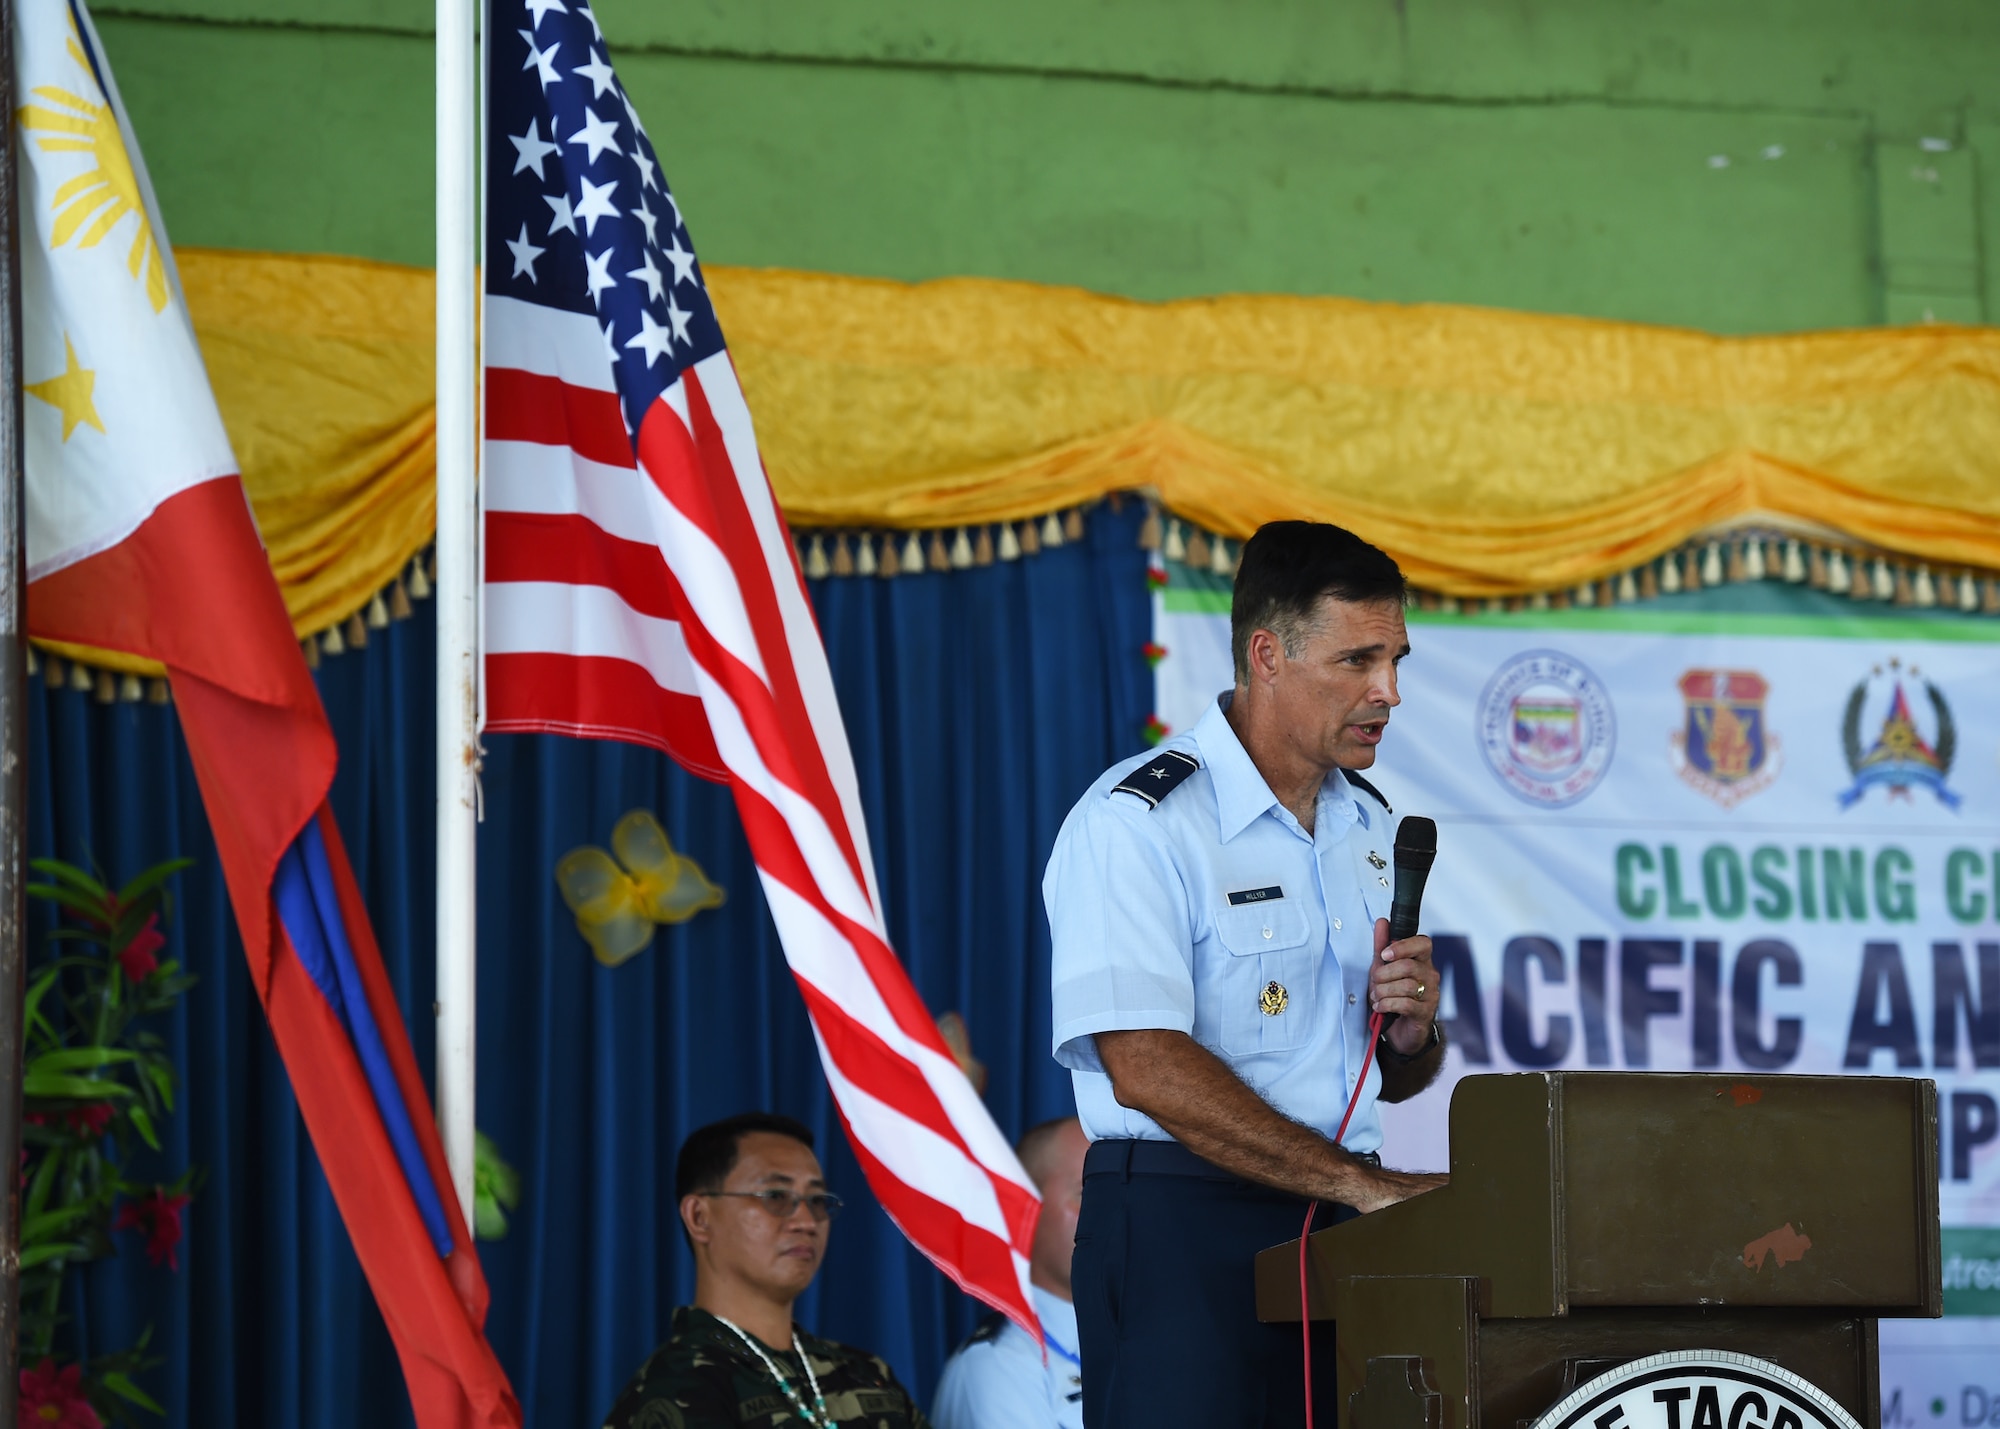 U.S. Air Force Brig. Gen. John Hillyer, mobility assistant to the chief of staff, Pacific Air Forces, speaks during the closing ceremony of Pacific Angel Philippines 15-1 in Bohol Province, Philippines, Aug. 24, 2015. Over the course of six days, 5,101 patients received health care and six different schools were refurbished providing rehabilitated learning space to approximately 5,000 students. Pacific Angel is a multilateral humanitarian assistance civil military operation, which improves military-to-military partnerships in the Pacific while also providing medical health outreach, civic engineering projects and subject matter exchanges among partner forces.(U.S. Air Force photo by Tech. Sgt. Aaron Oelrich/Released)